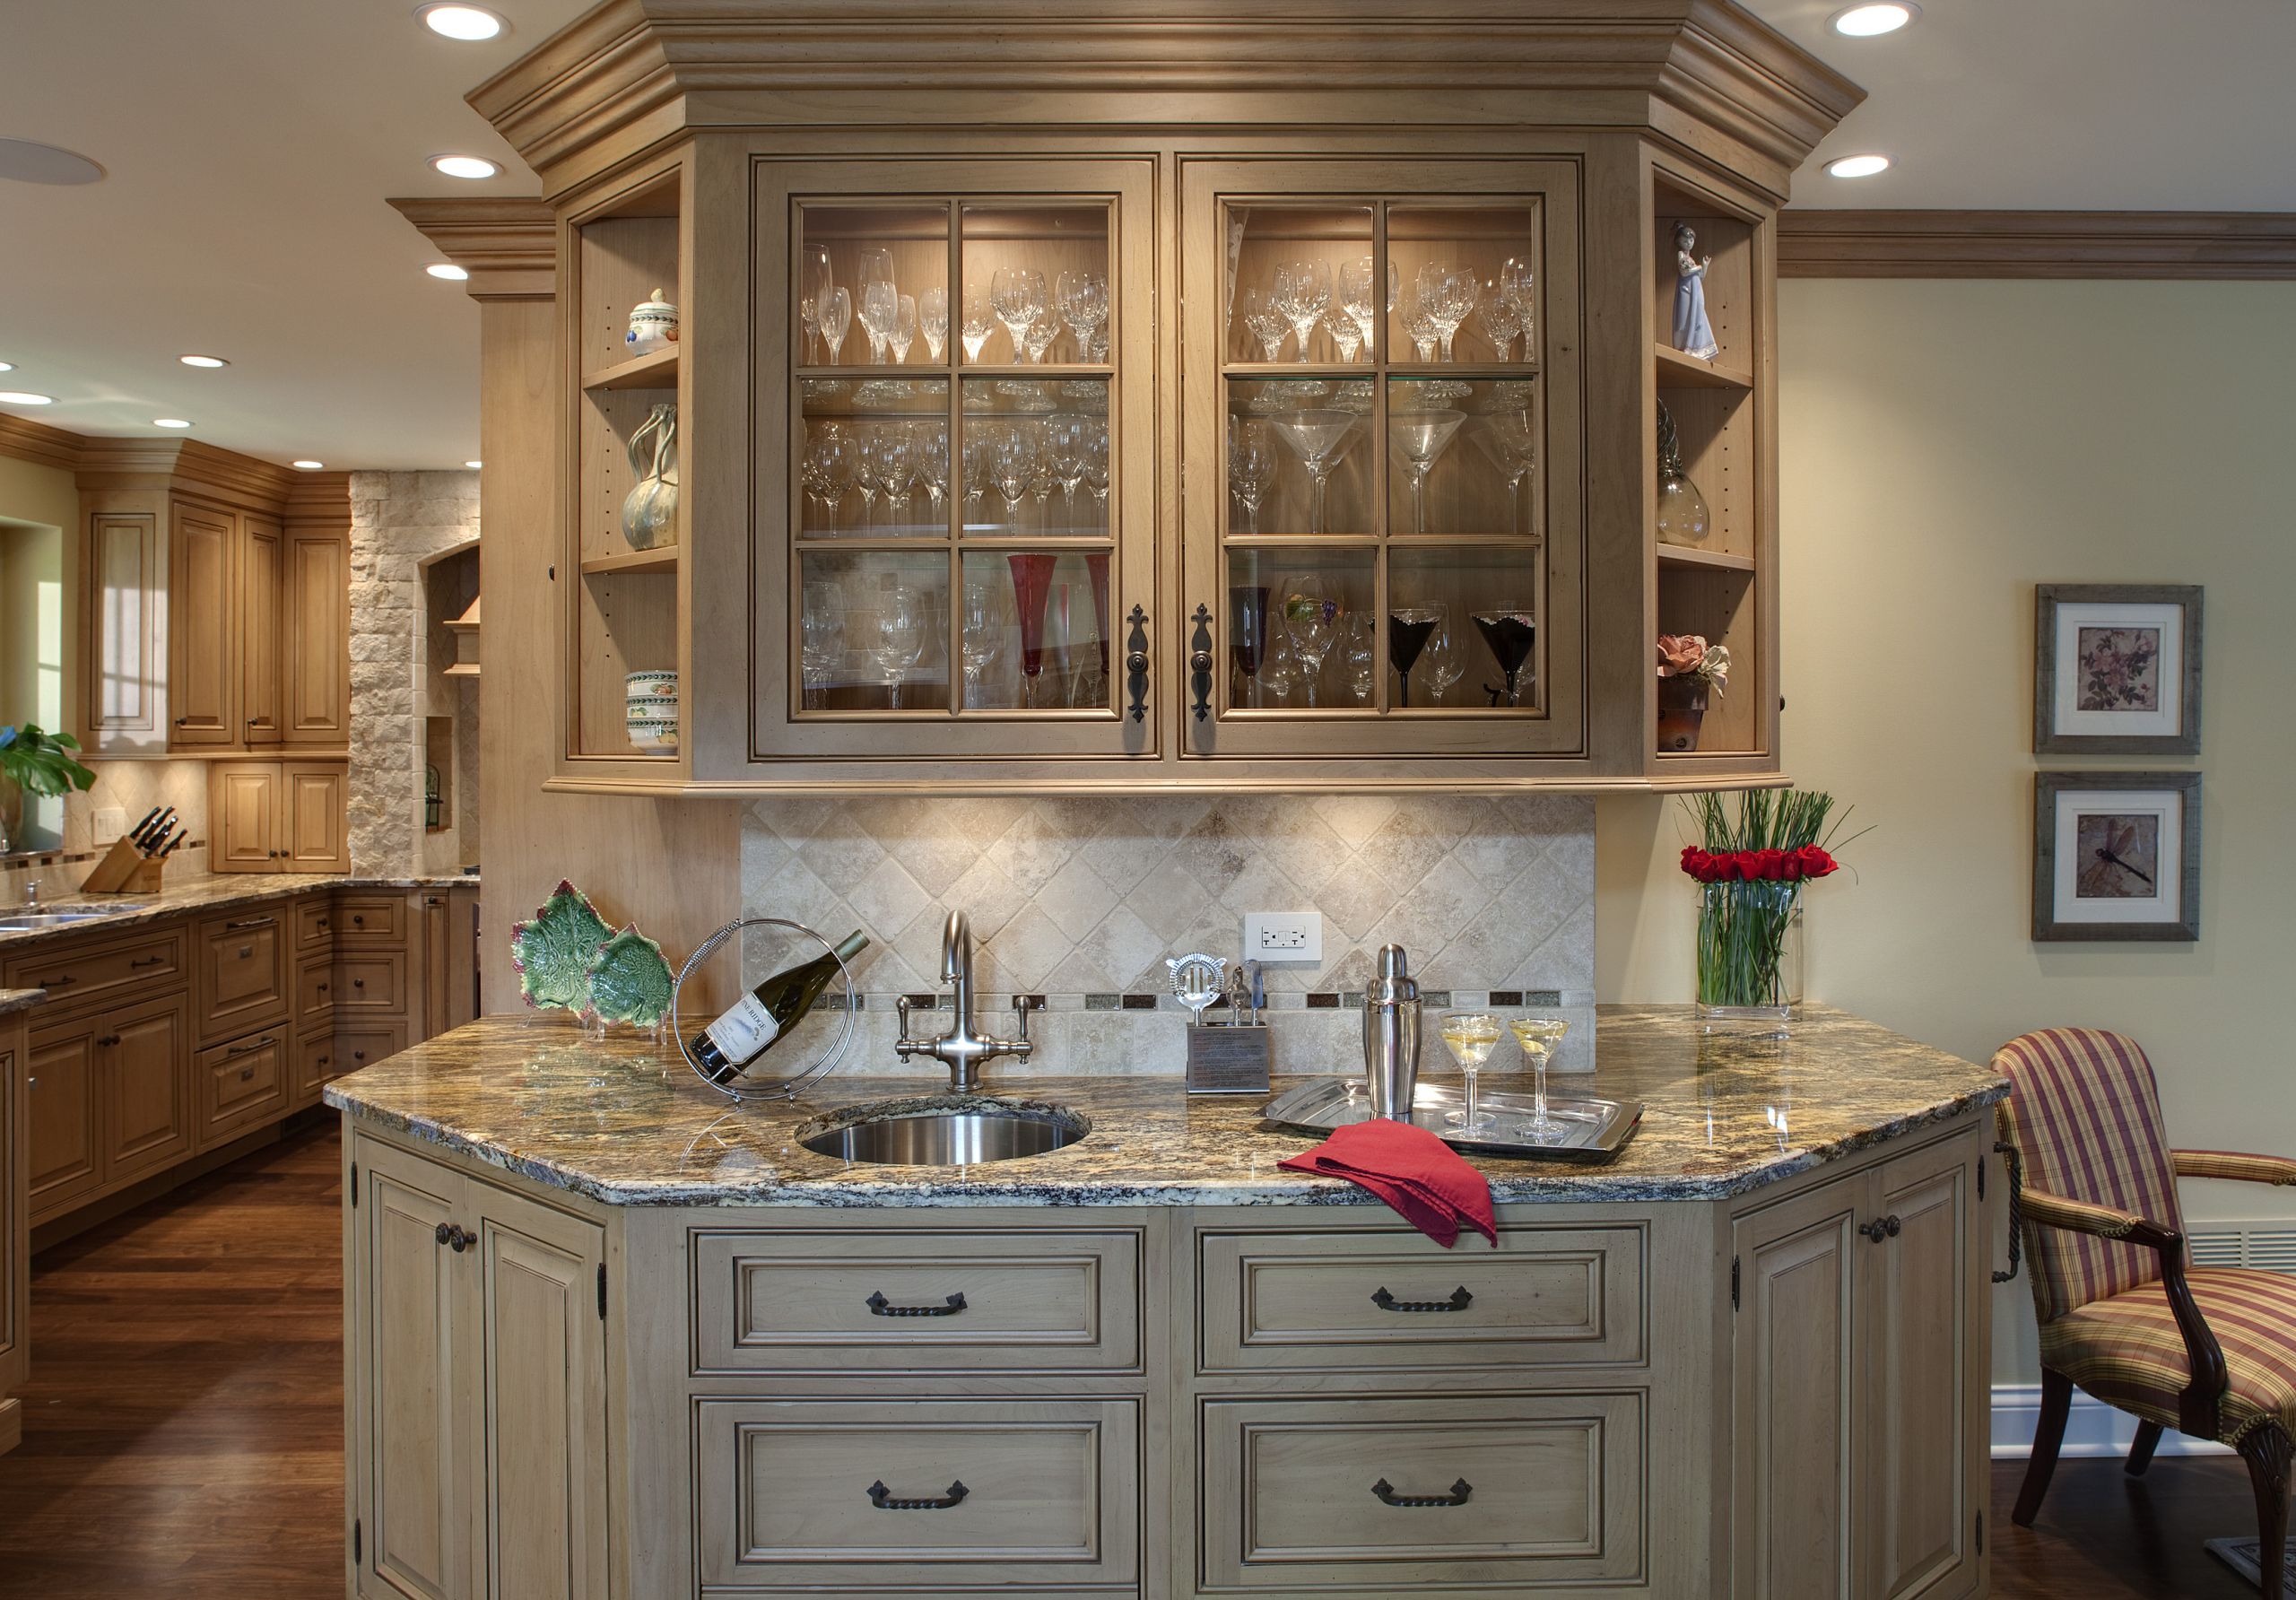 Tuscan Kitchen Cabinet
 Tuscan Style Kitchen Cabinet with White and Wooden Tone